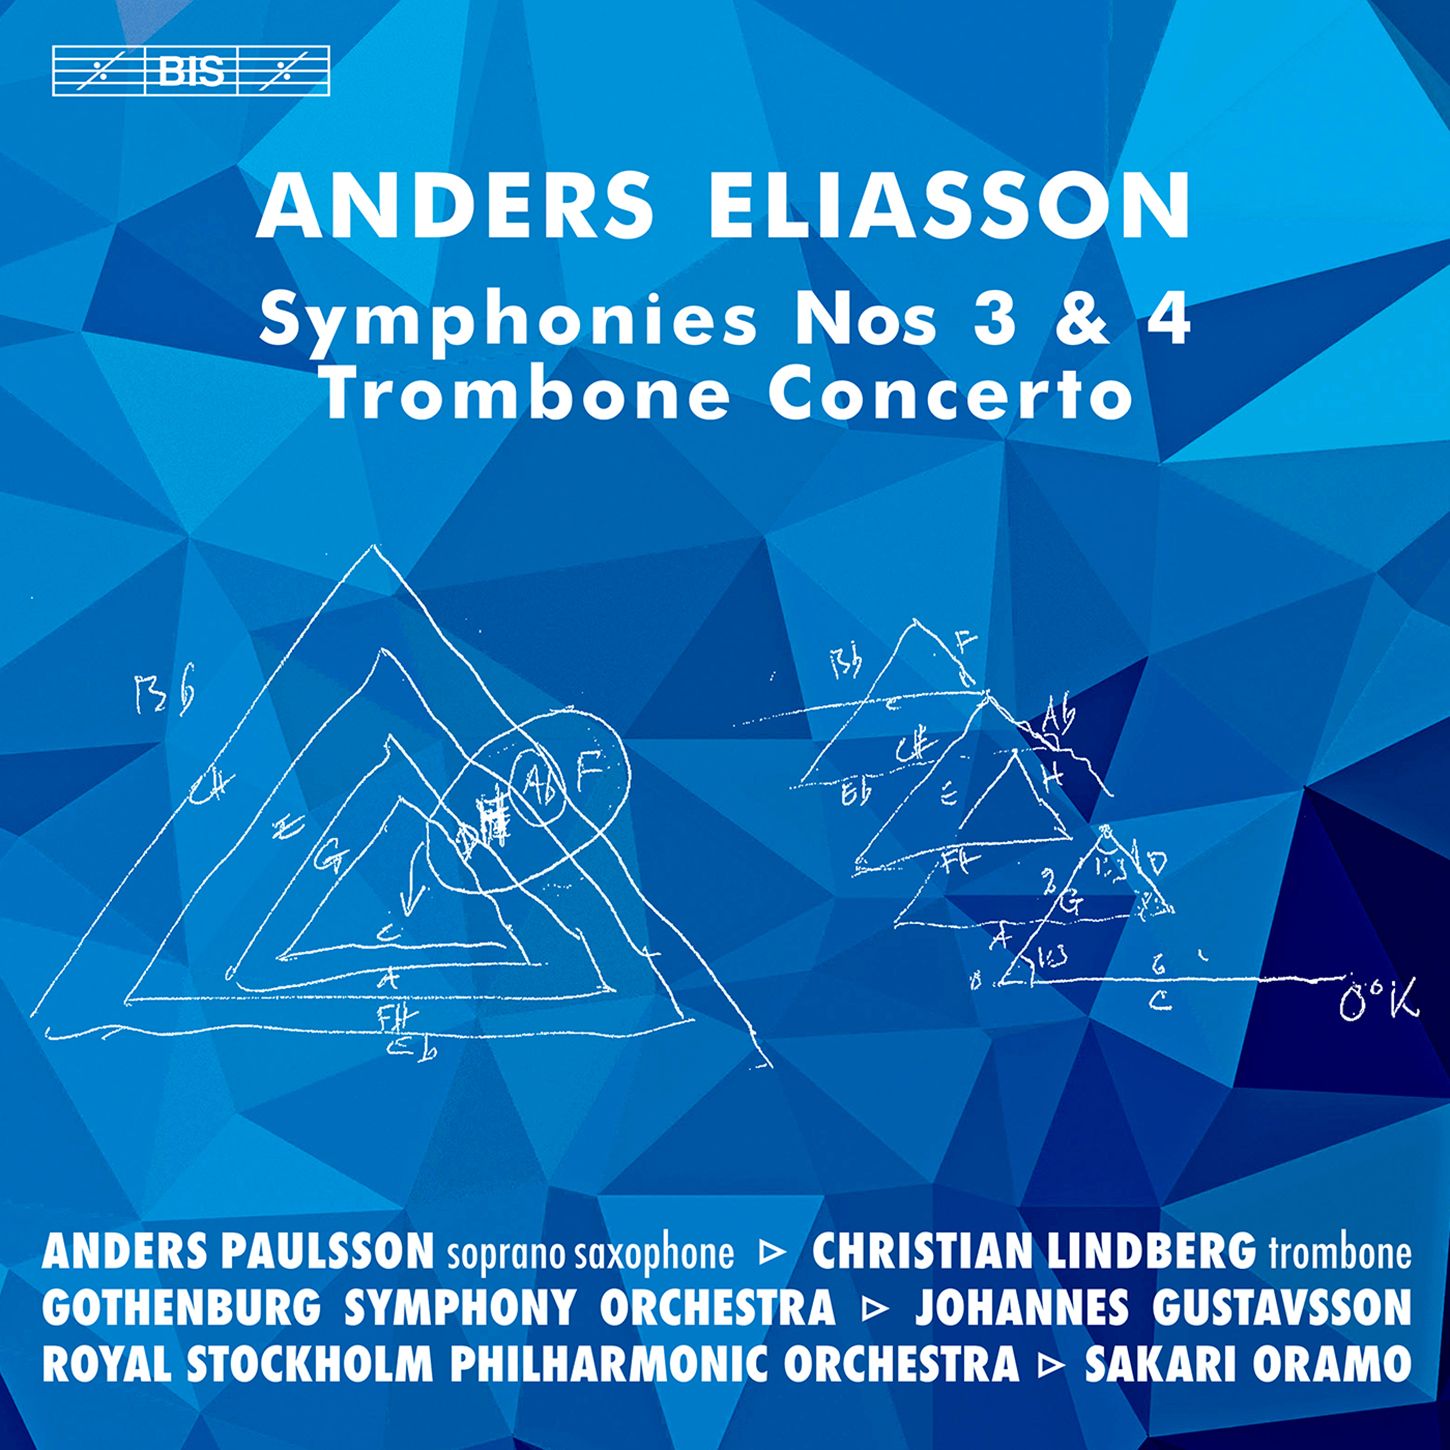 Music is like H20: Eliasson Symphonies & Trombone Concerto on BIS